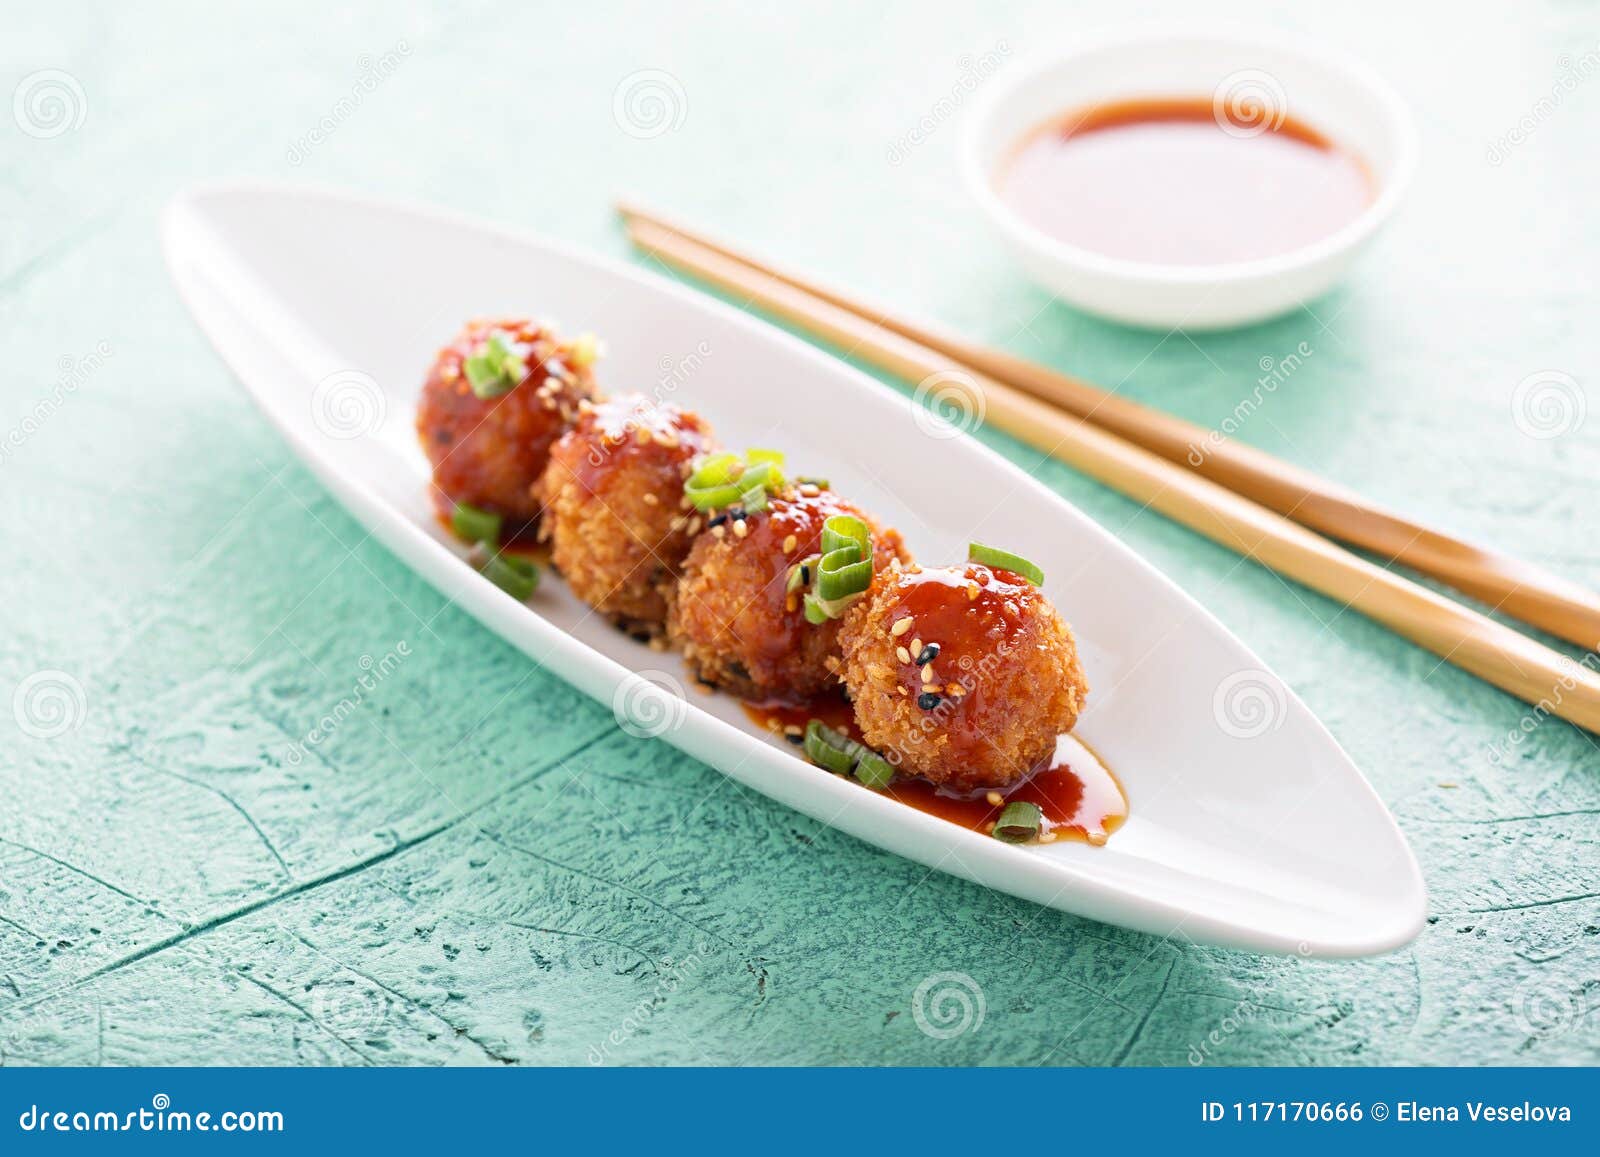 Fried asian appetizers stock photo. Image of meat, fresh - 117170666